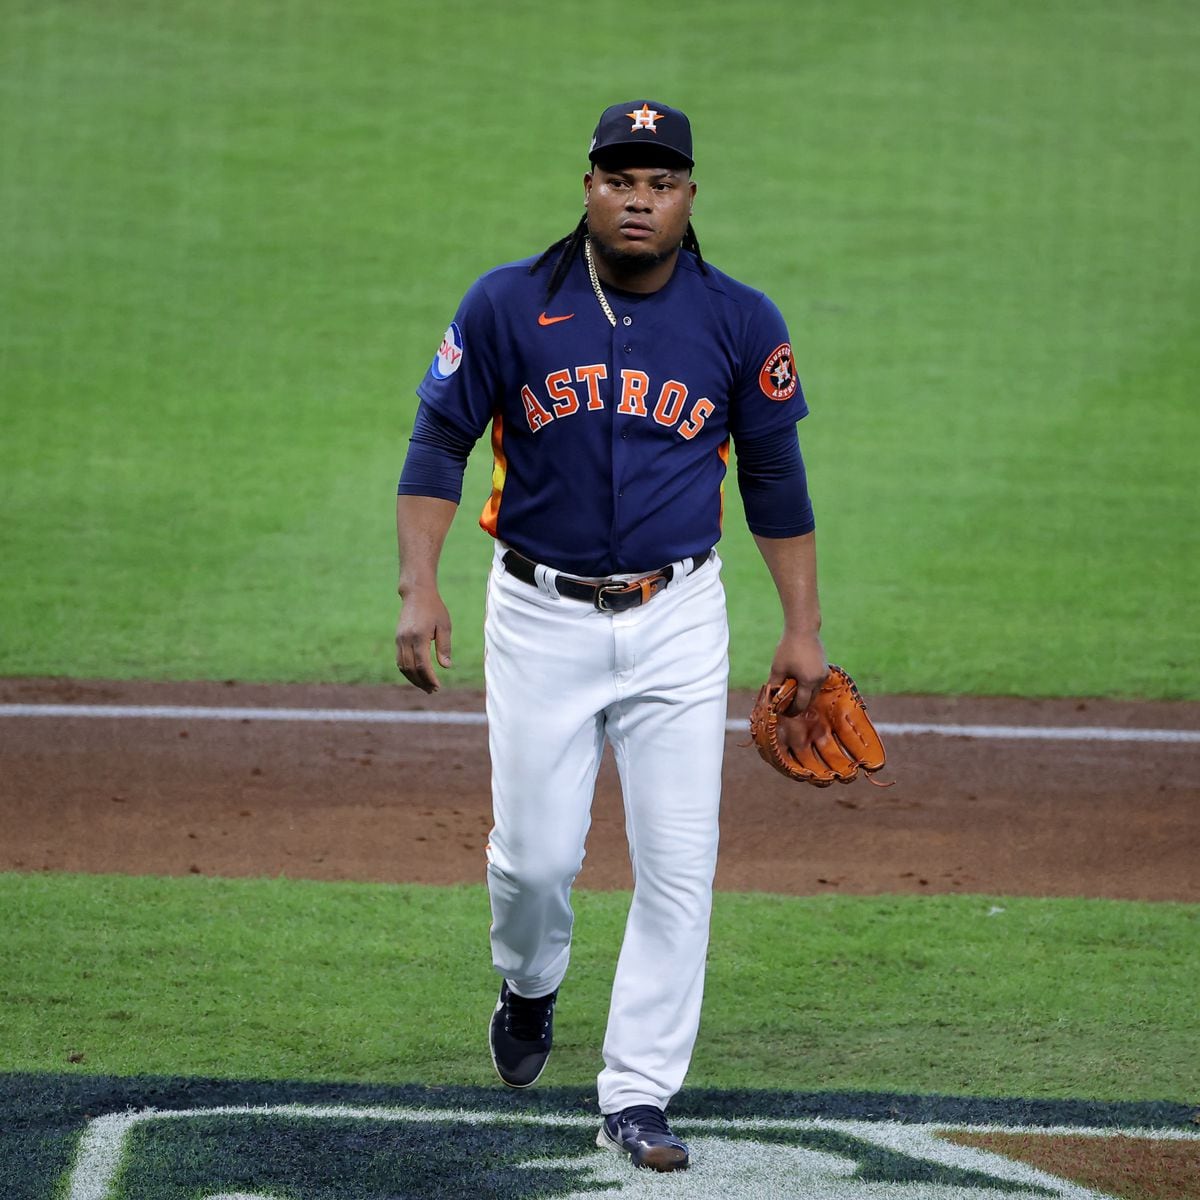 MLB News: Astros easily defeat Phillies in Game 6 to claim the